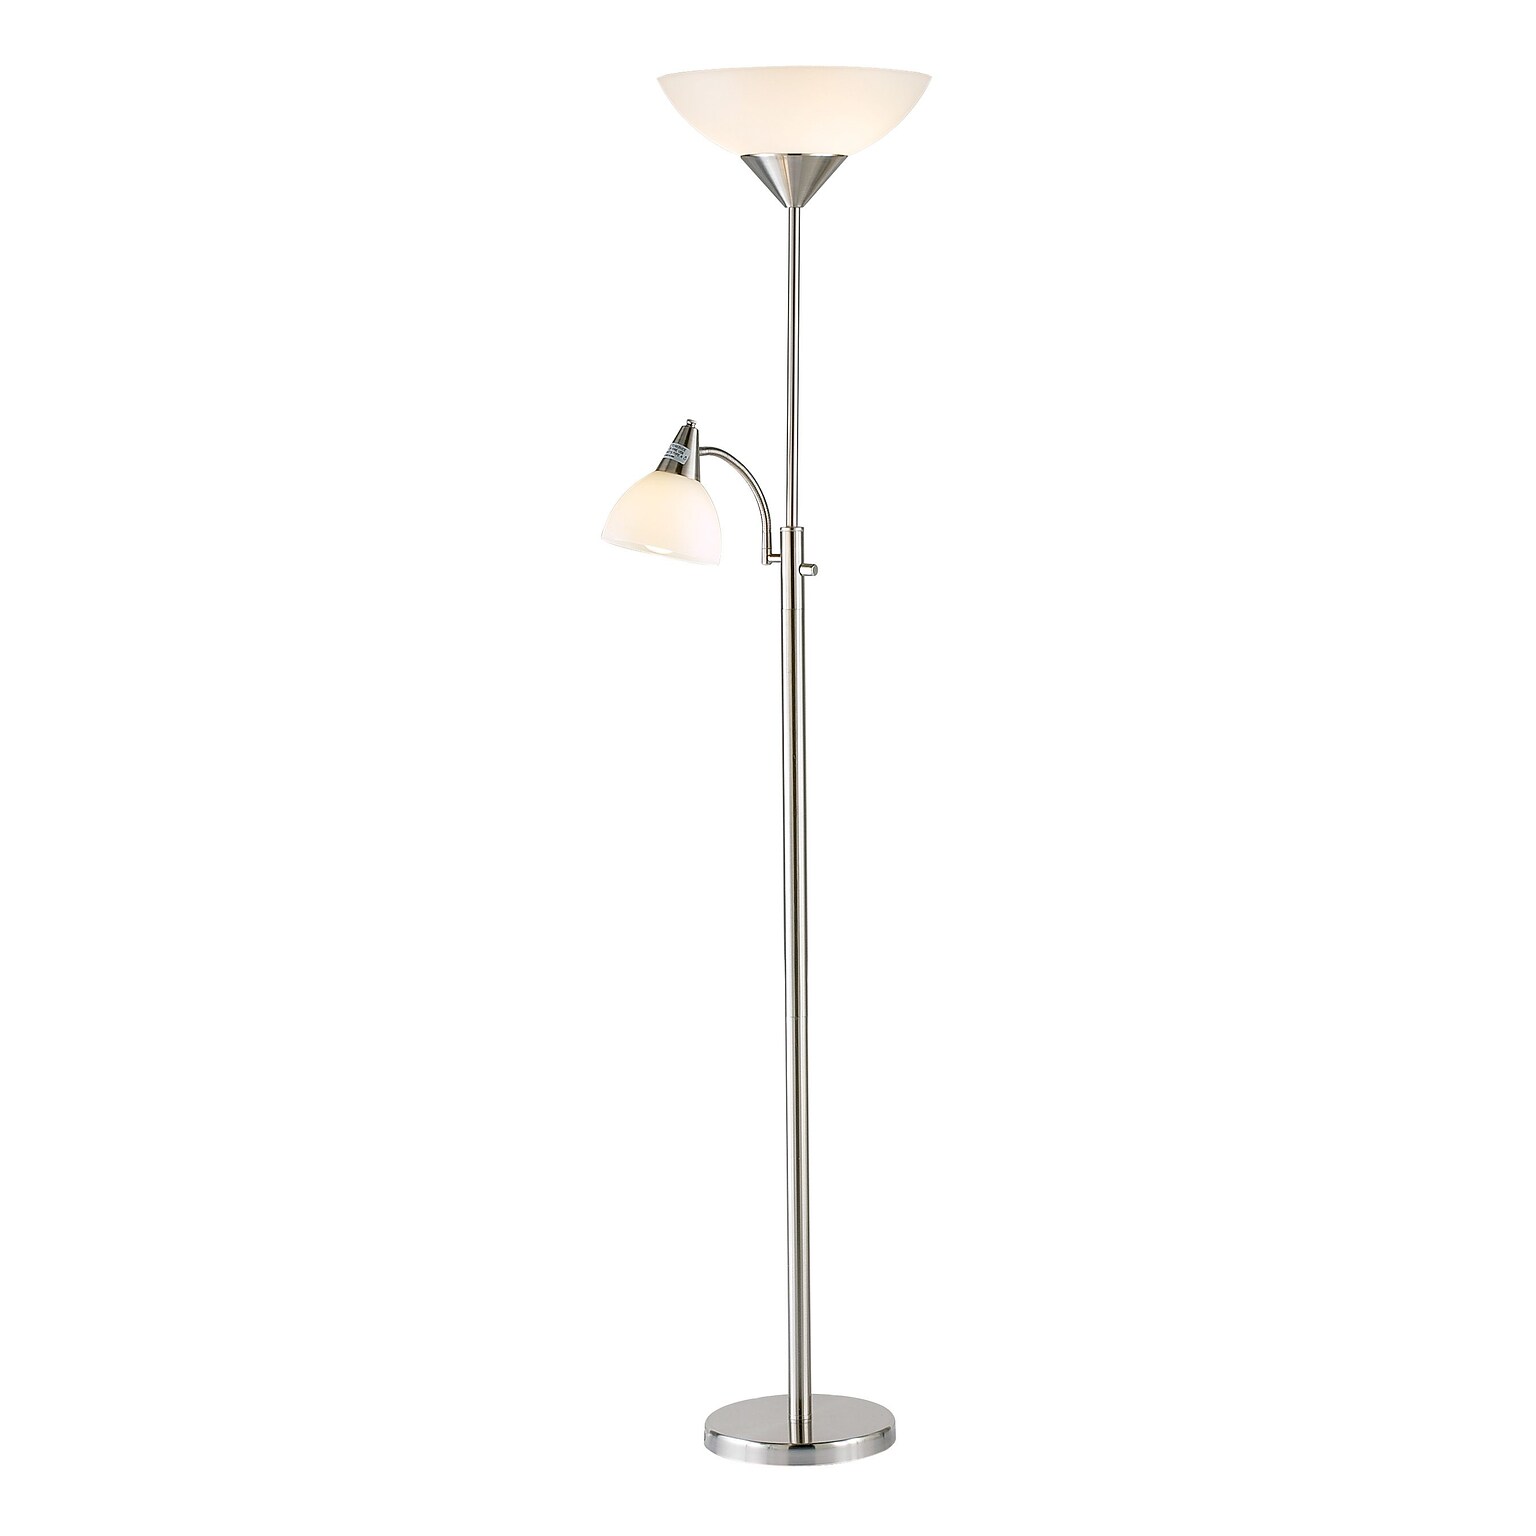 Adesso® Piedmont 71H Brushed Steel 300W Torchiere Floor Lamp with Reading Light and White Plastic Shades (7202-22)